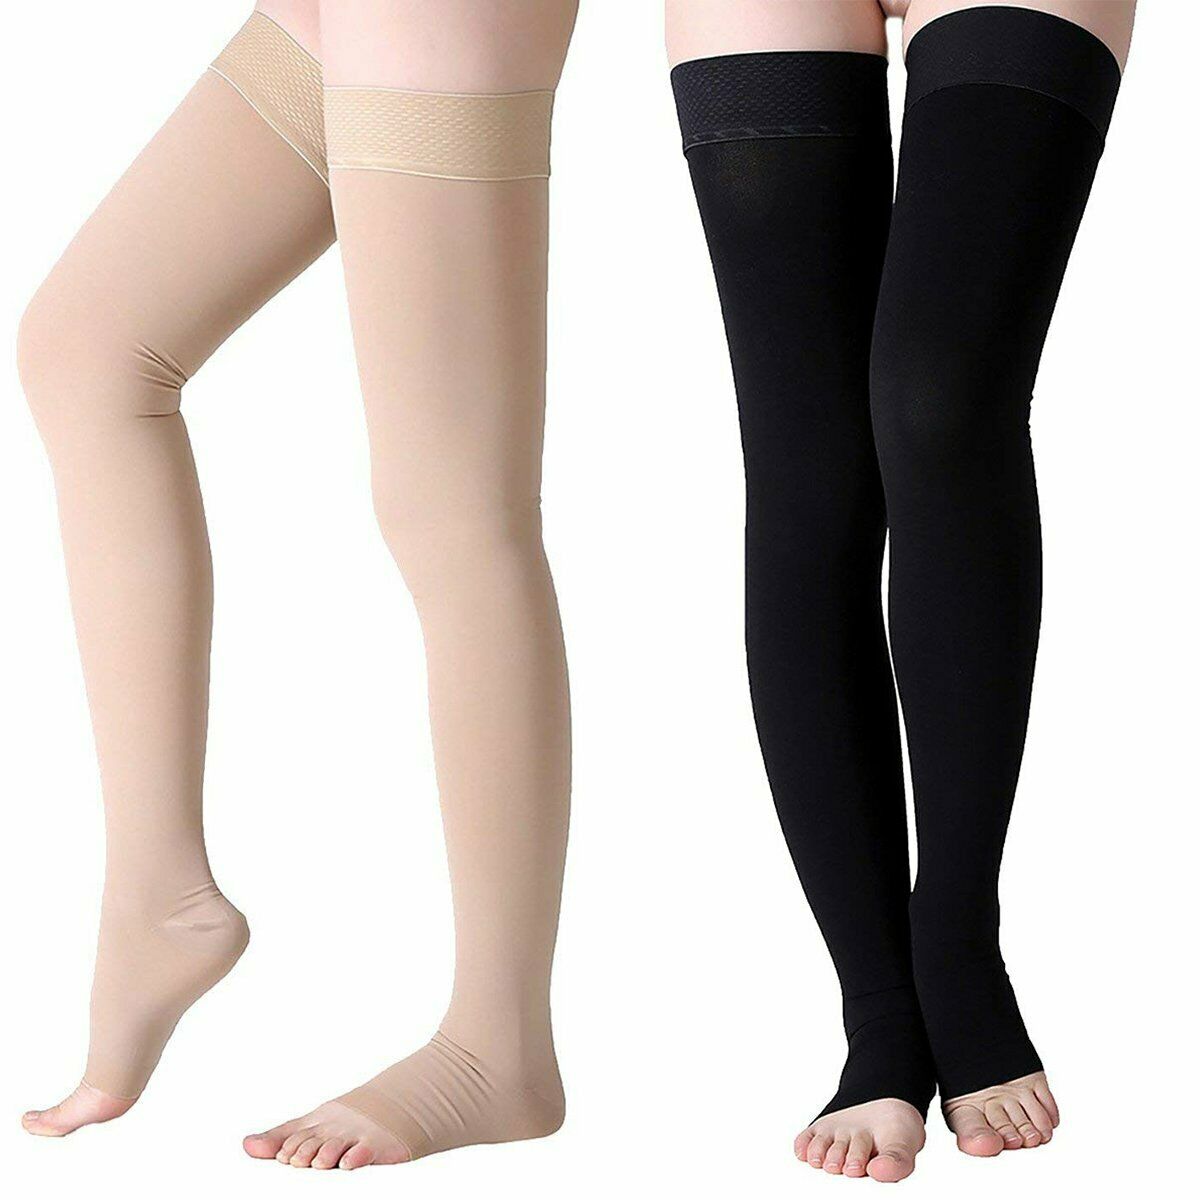 Men Women 23 32mmhg Medical Compression High Stockings Silicone Band Thigh Highs Ebay